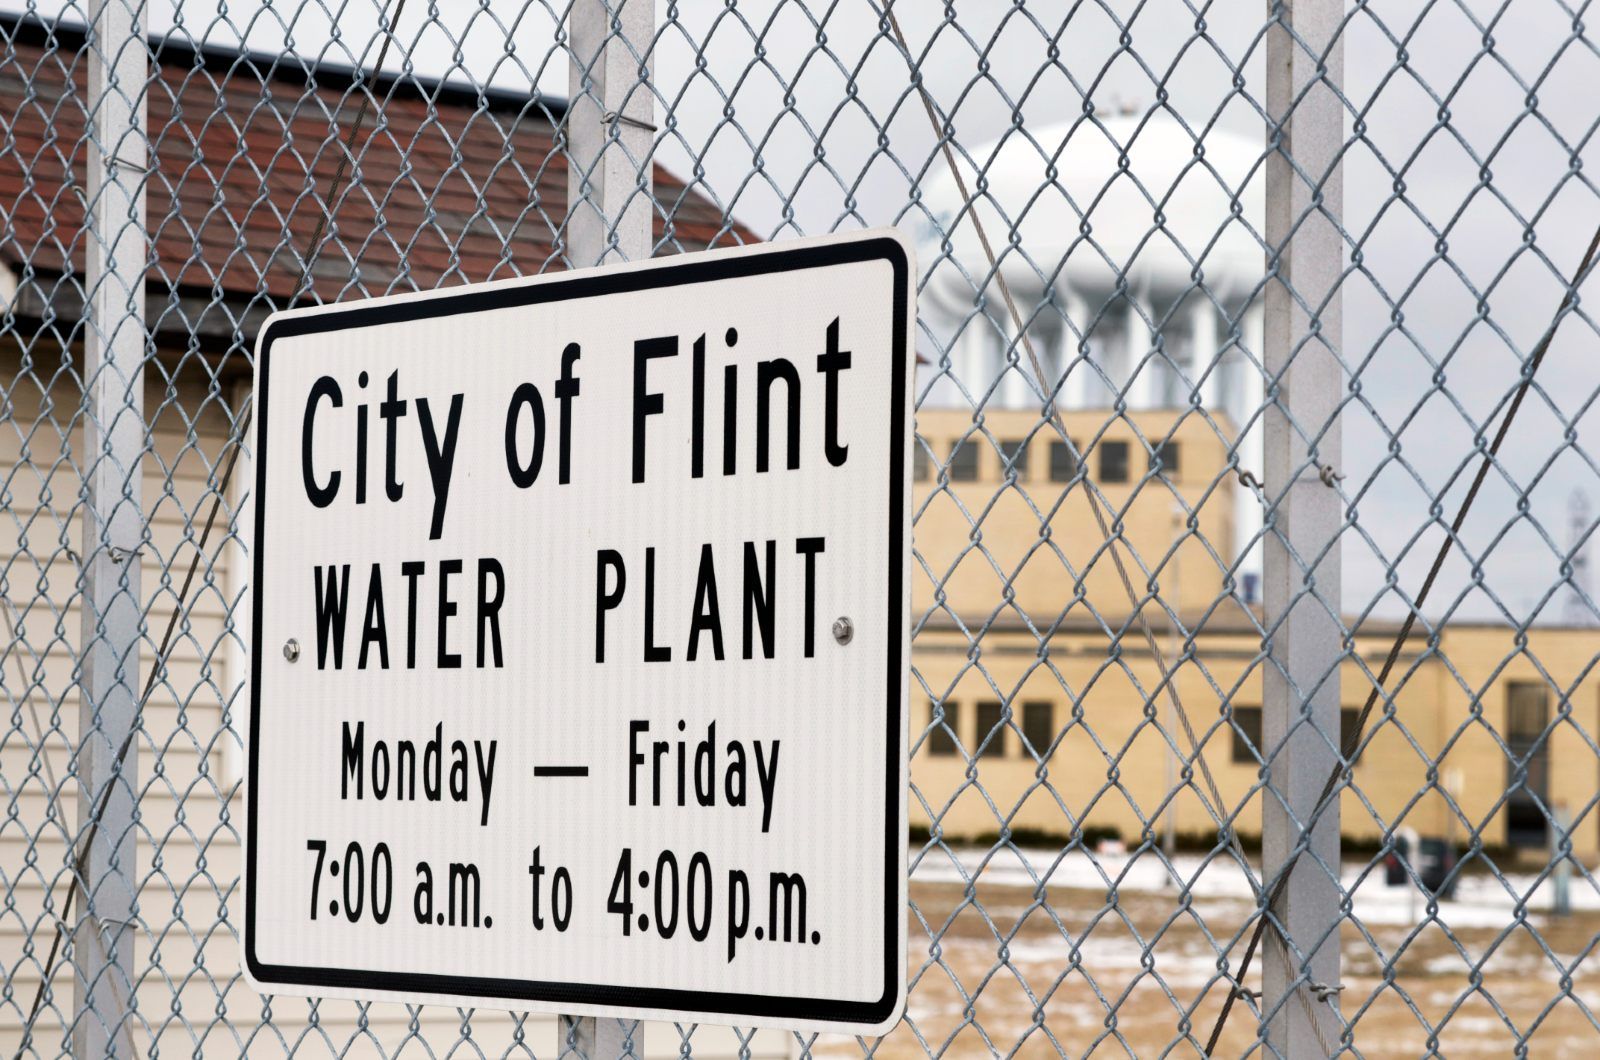 Sign on fence in front of Flint, Mich., water plant - Flint water